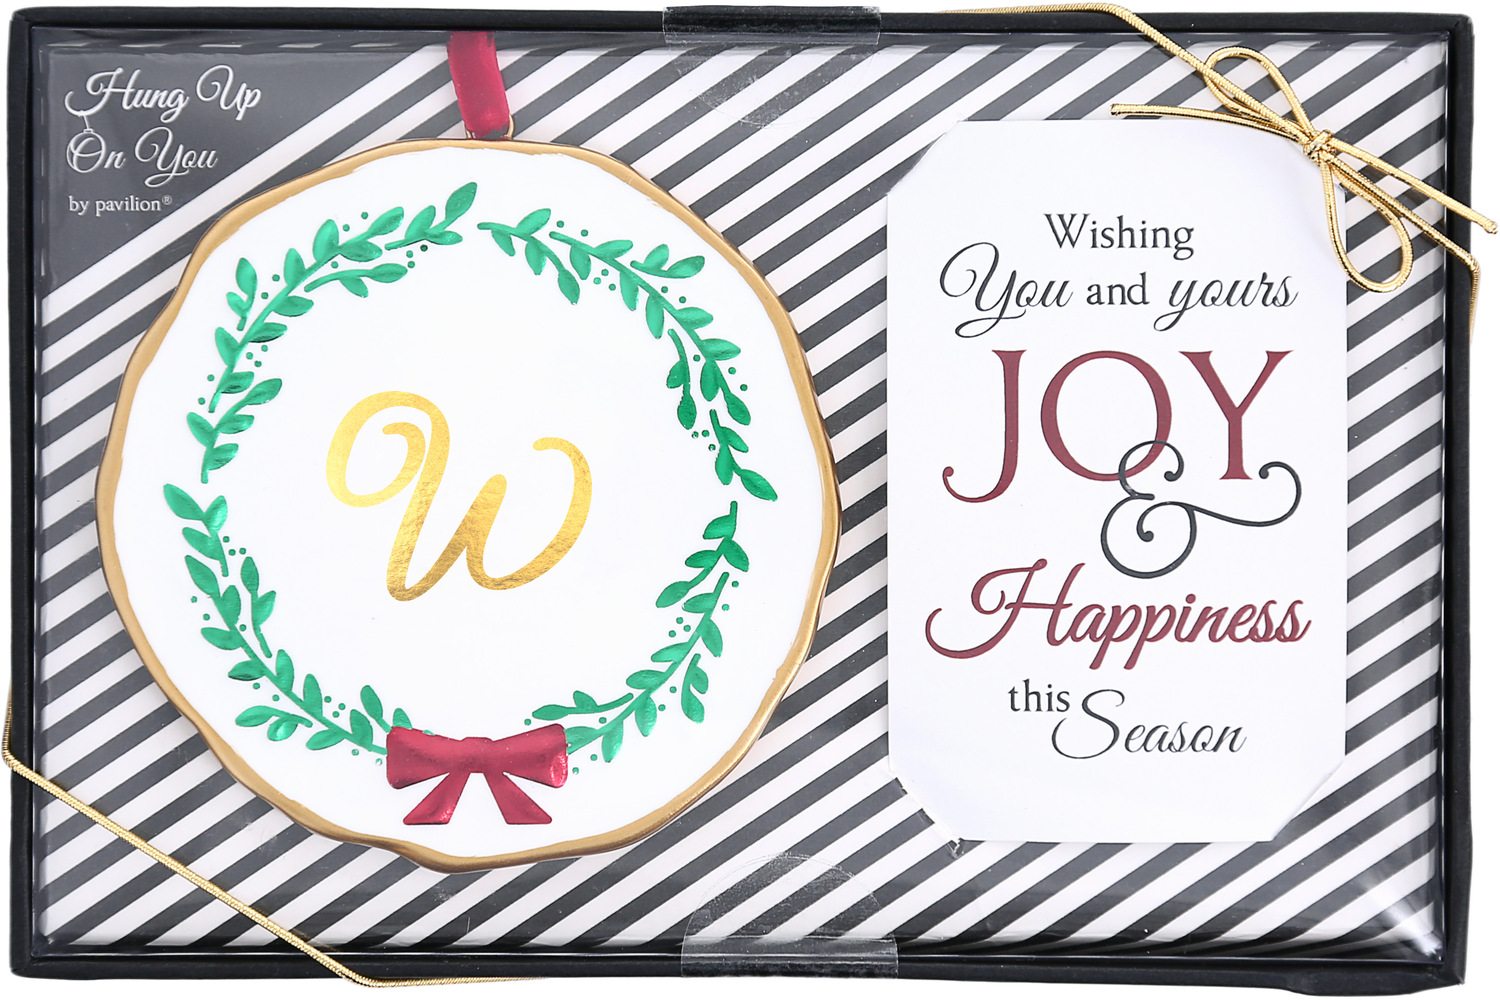 W by Hung Up on You - W - 4" Monogram Ornament
